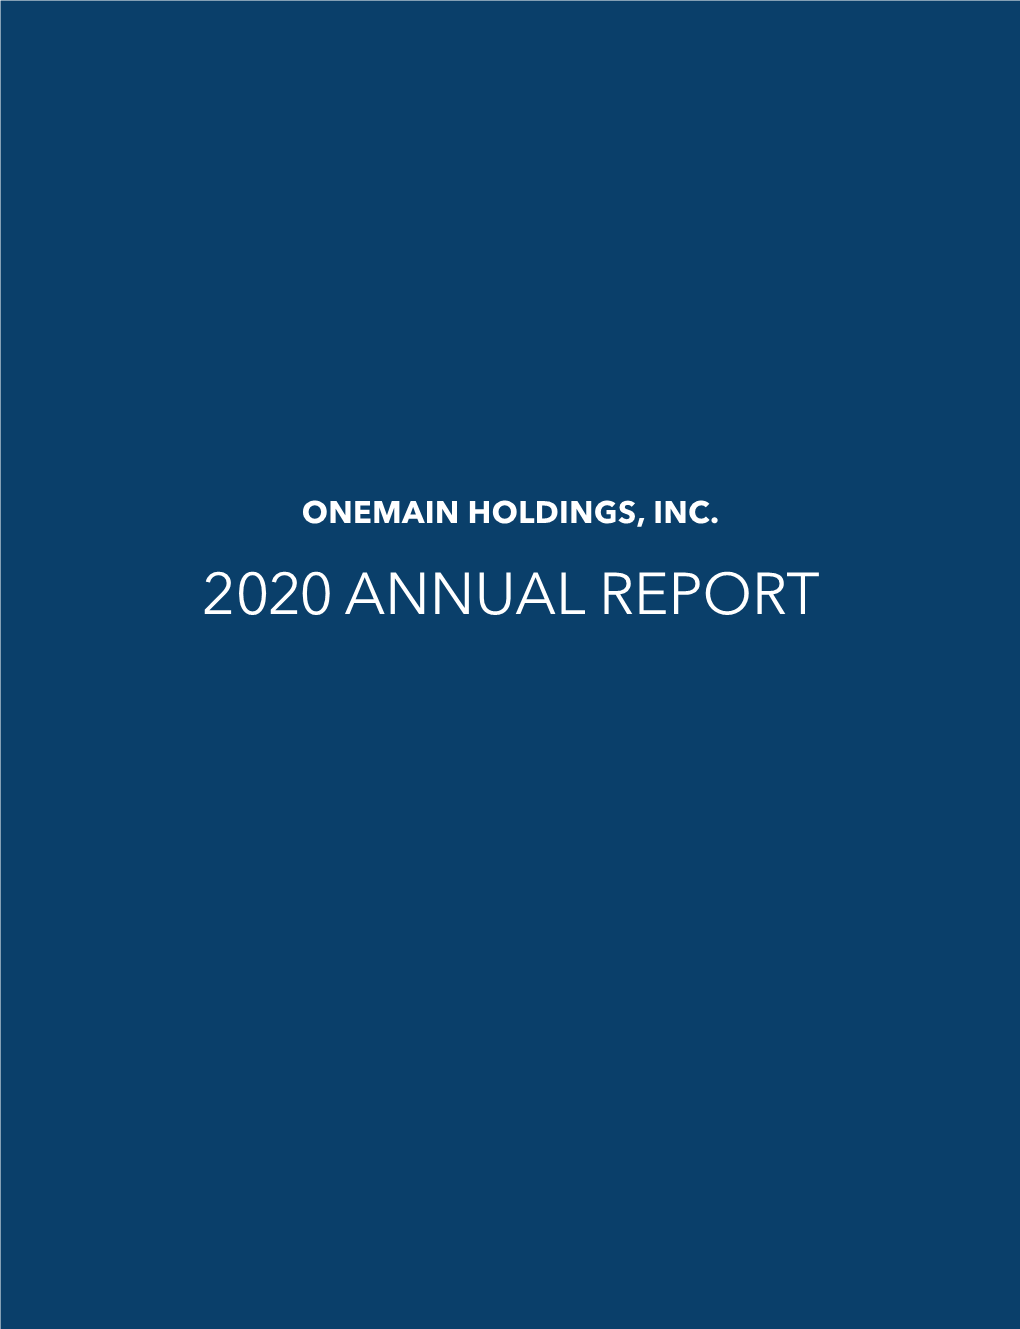 2020 ANNUAL REPORT FINANCIAL HIGHLIGHTS ($ in Millions, Except Per Share Amounts)